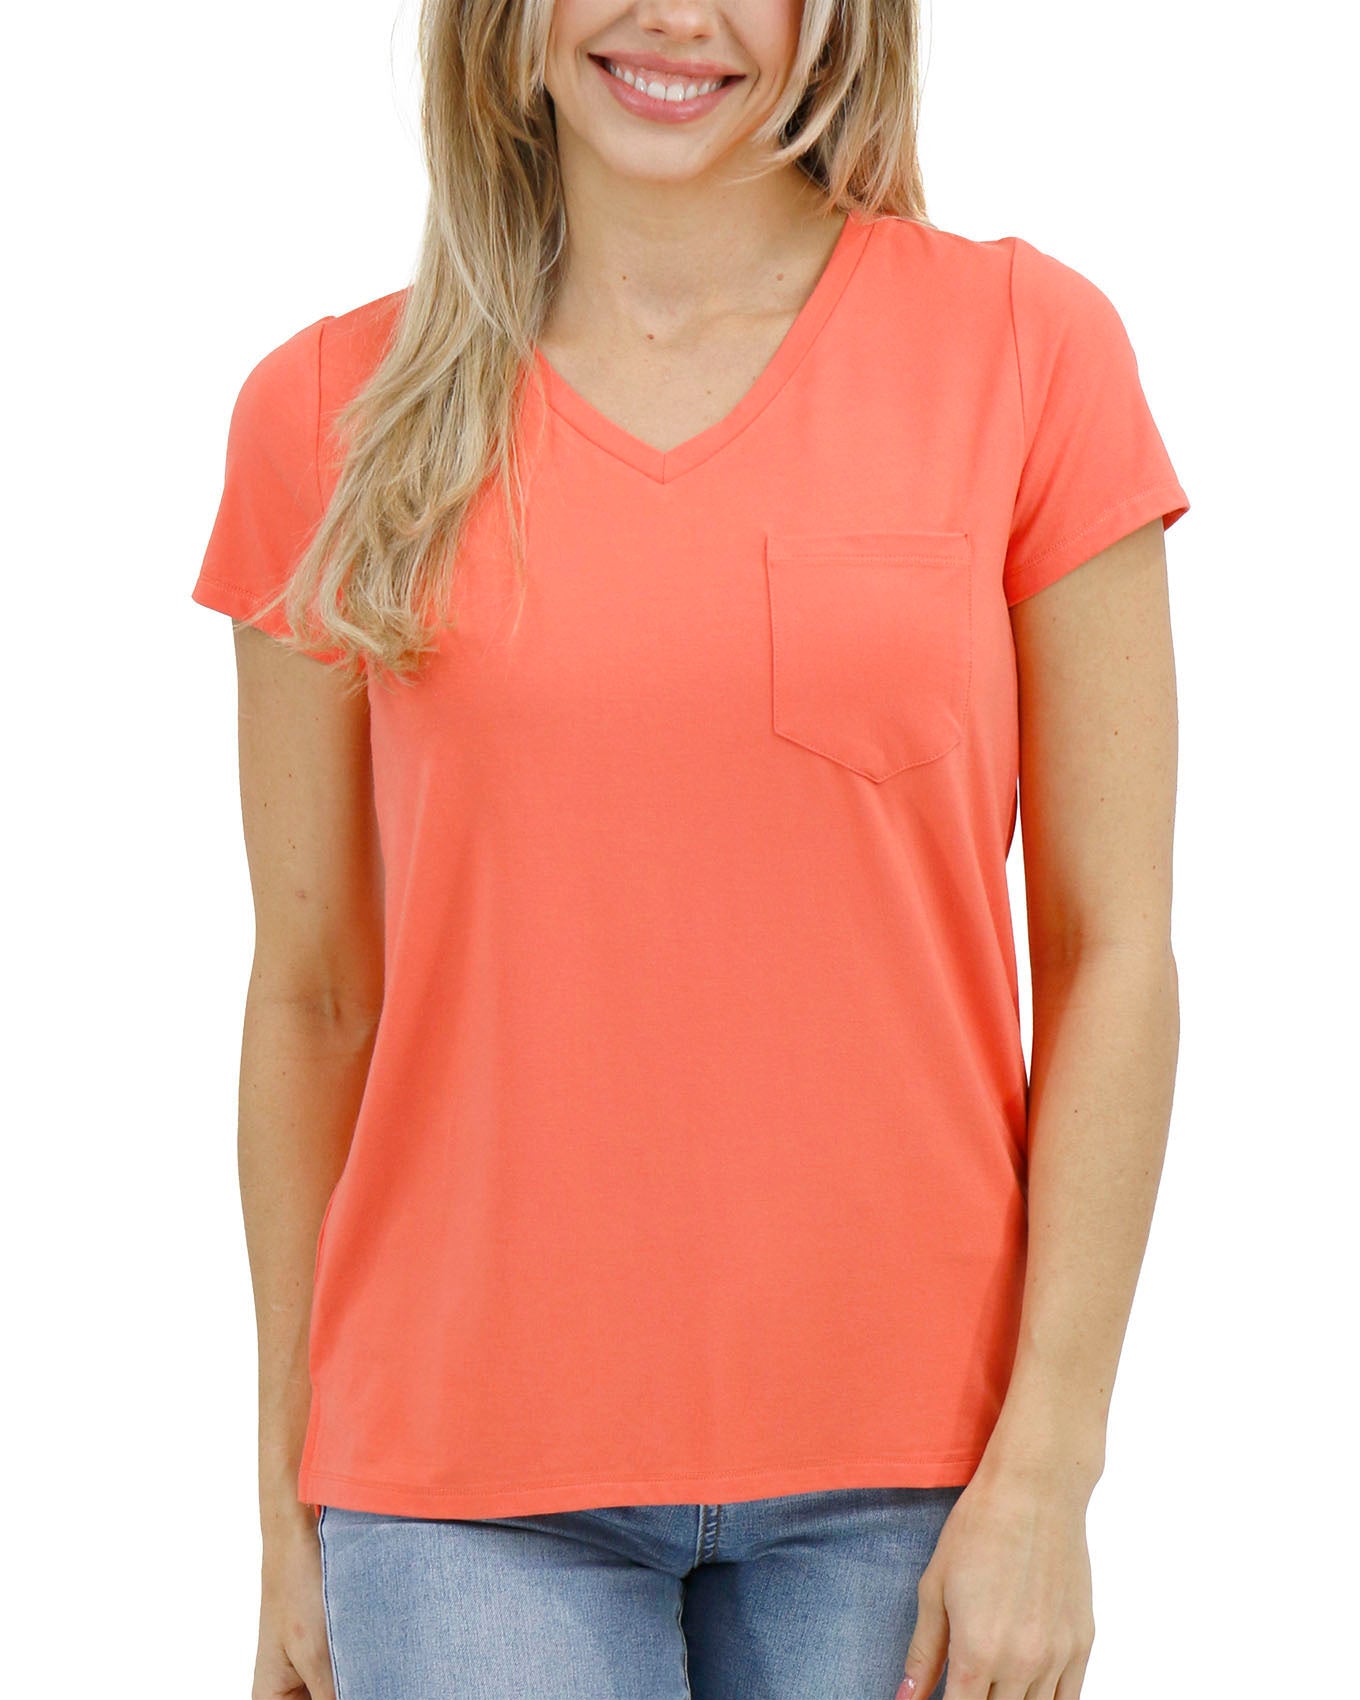 Front stock shot of Apricot True Fit Perfect Pocket Tee